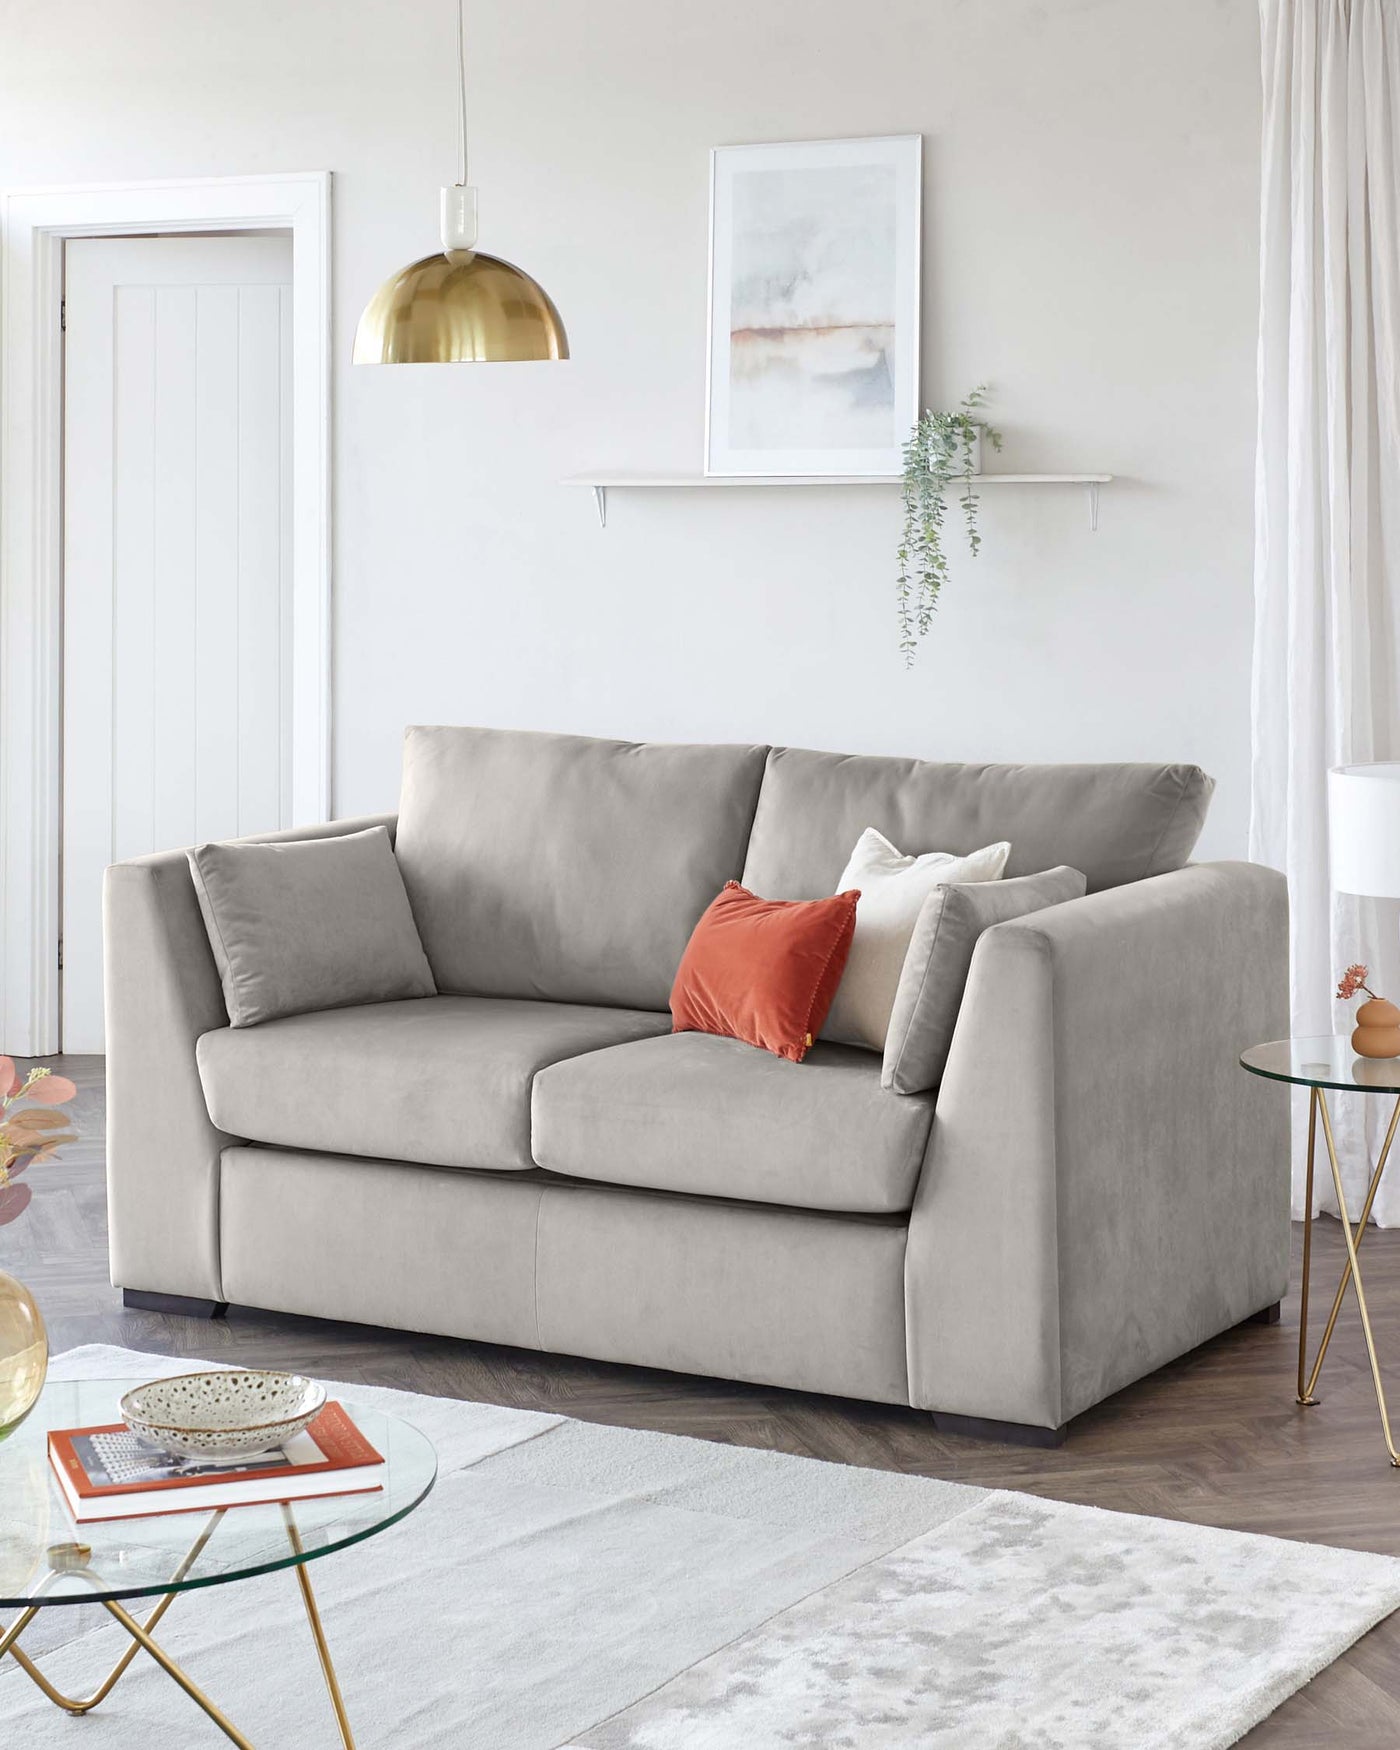 A contemporary three-seater sofa upholstered in light grey fabric with plush cushioning. The sofa is accessorized with three throw pillows in neutral and coral tones. There is also a round glass-top coffee table with a golden frame, accompanied by a small, decorative bowl and a book on top. Underneath lies a two-tone geometric patterned area rug in shades of grey and white.